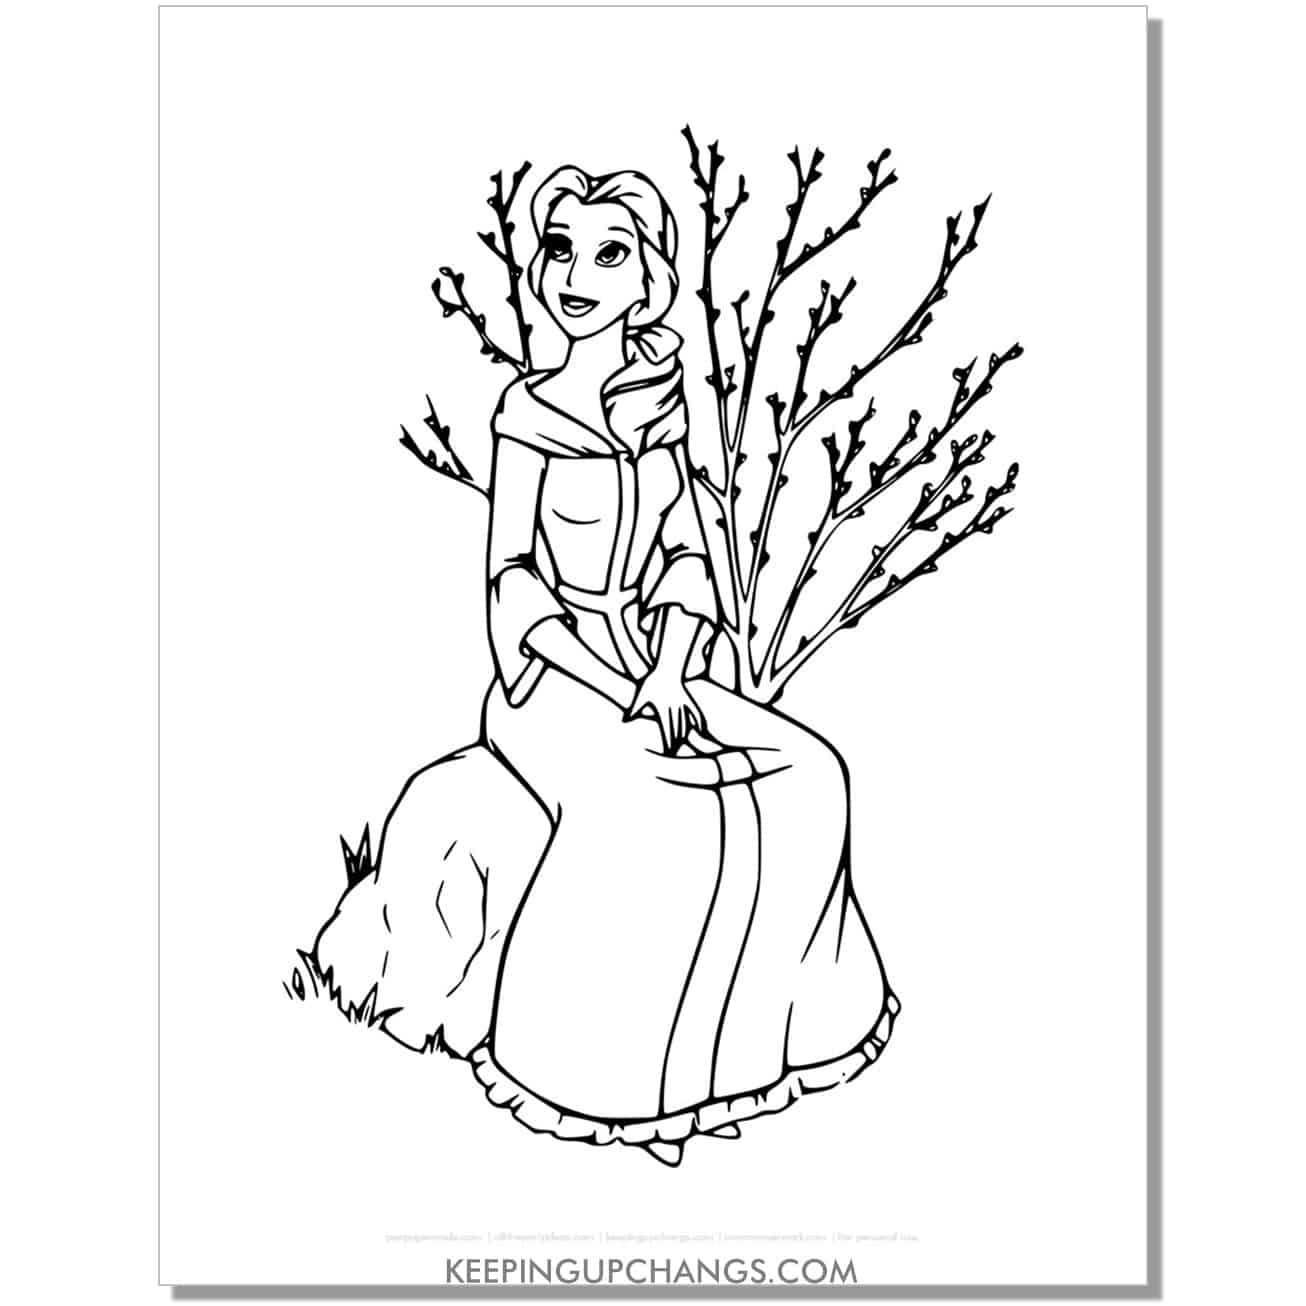 beauty and beast belle sitting near tree with branches coloring page, sheet.